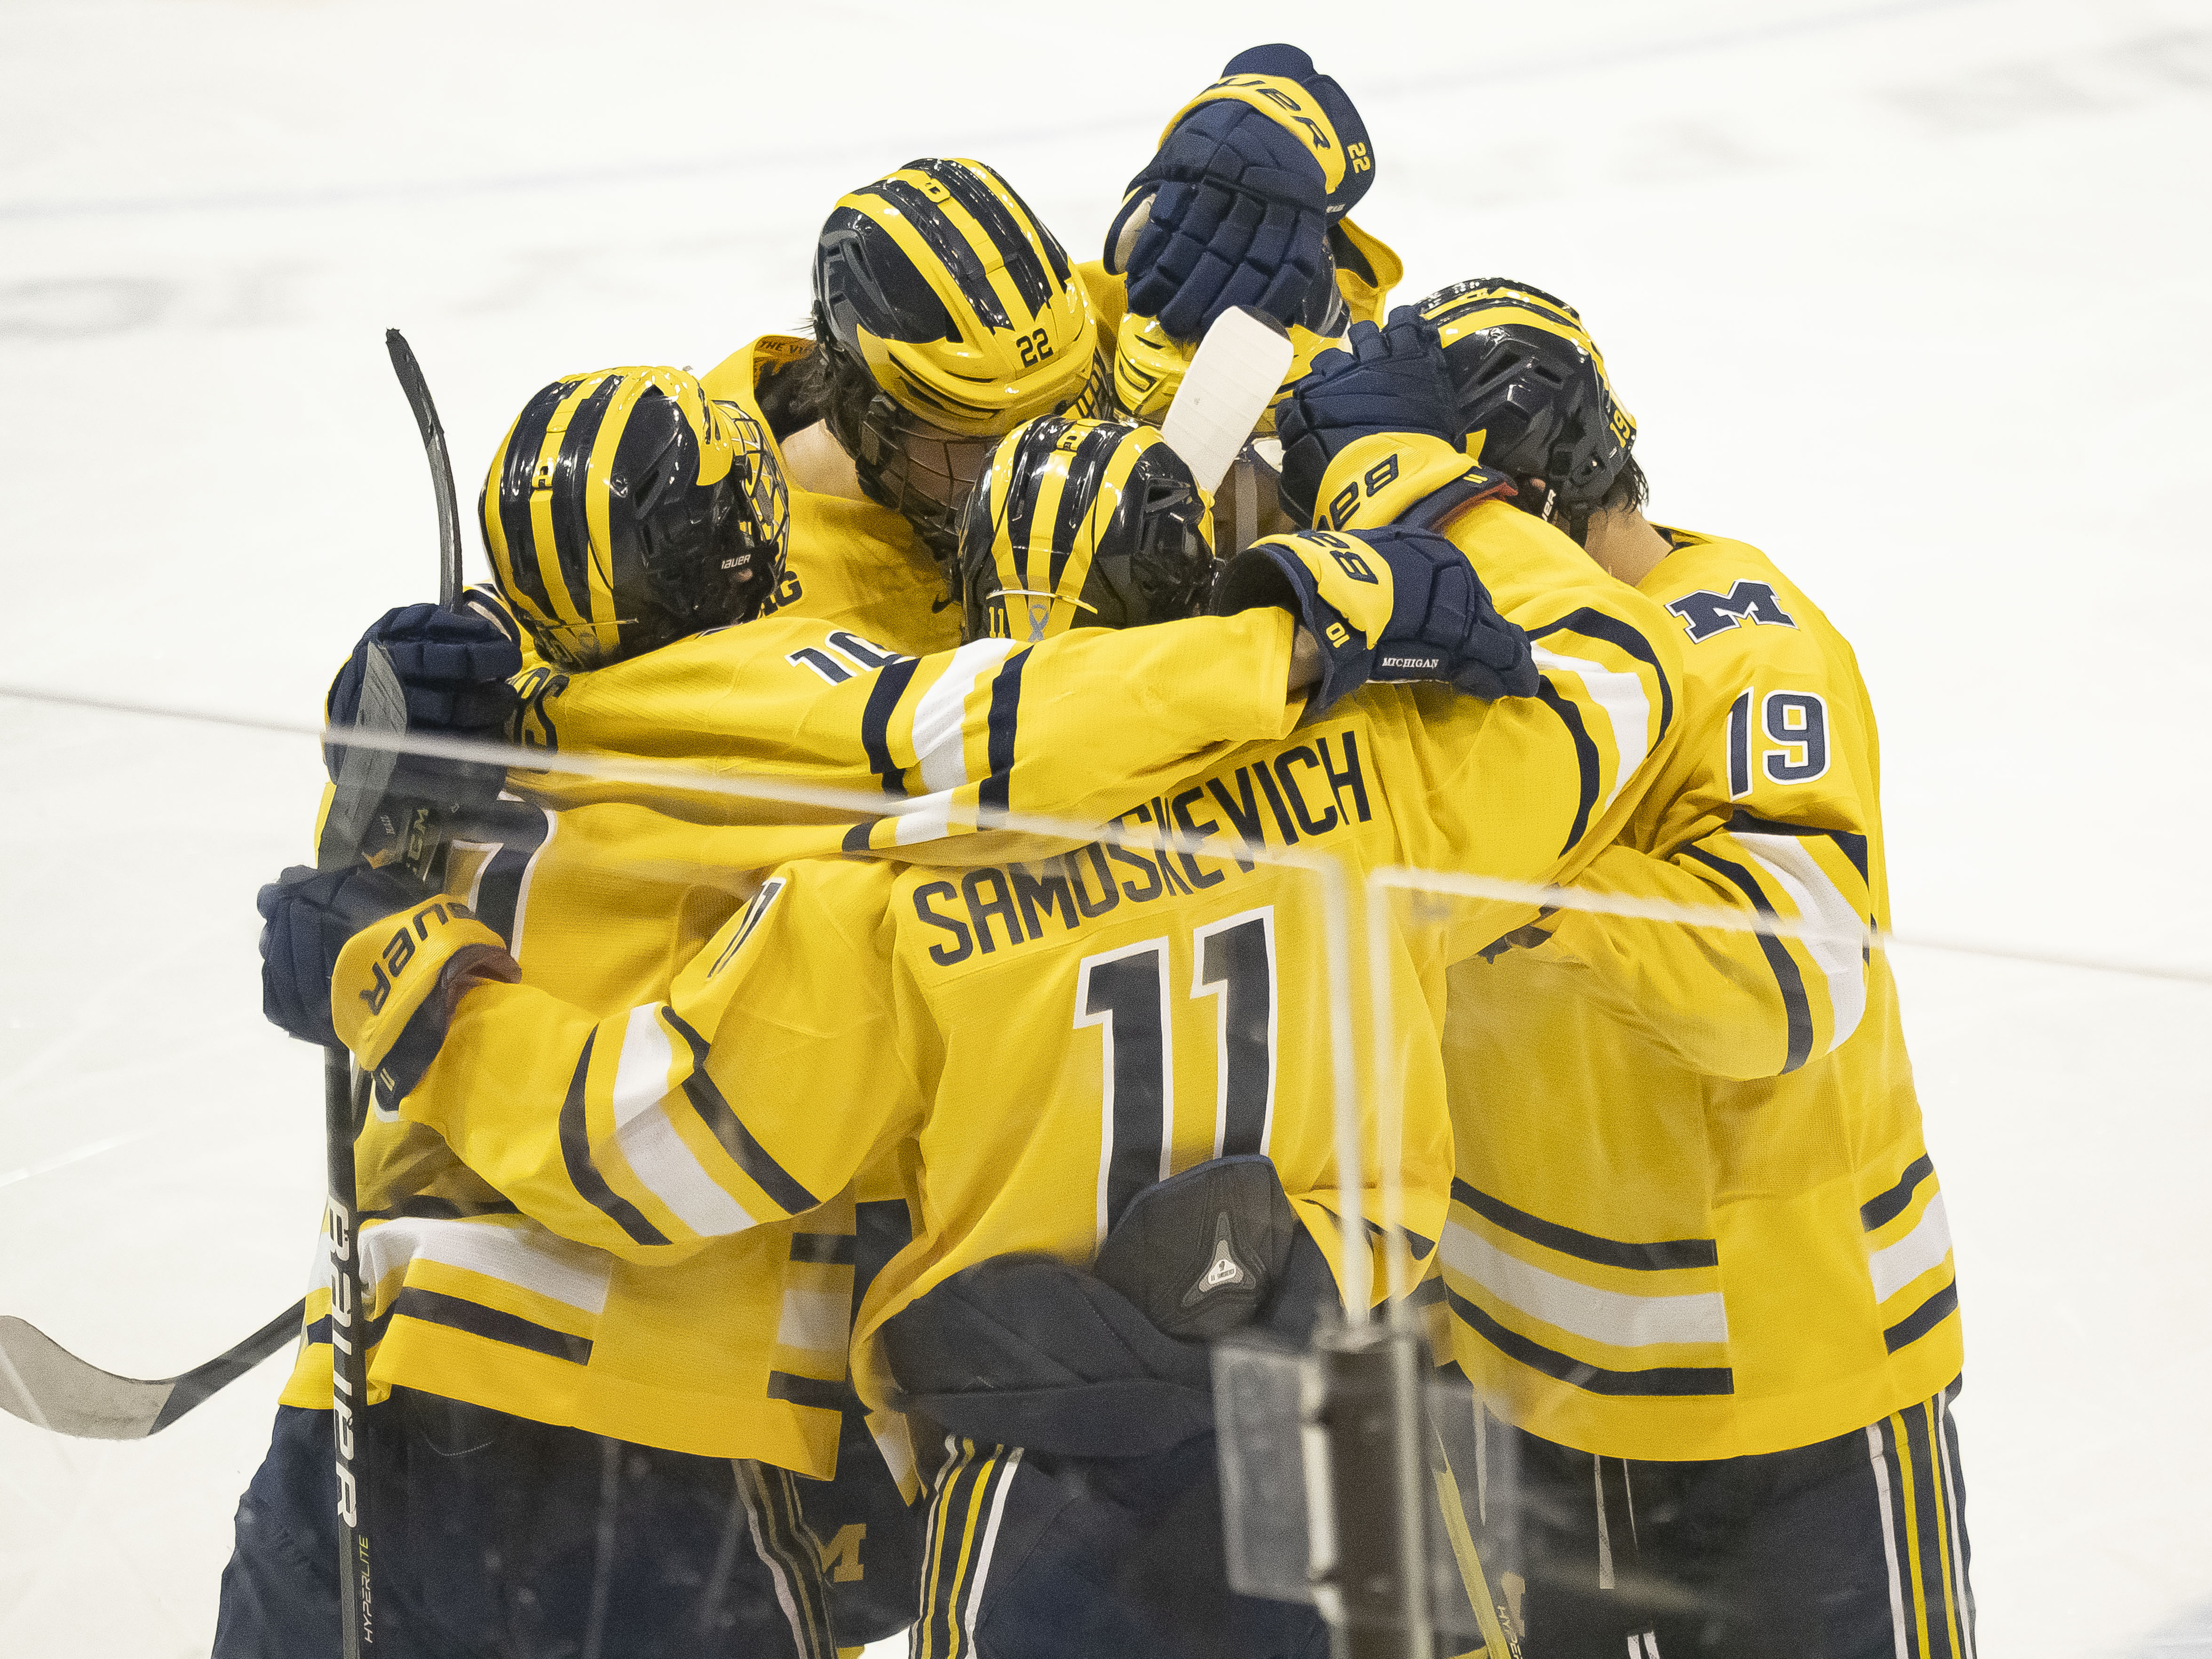 Michigan Wolverines forward Matty Beniers (10) celebrates with his teammates after scoring a goal during a men’s college hockey game between the Michigan Wolverines and the Notre Dame Fighting Irish on February 26th, 2022 at the Compton Family Ice Arena in South Bend IN.